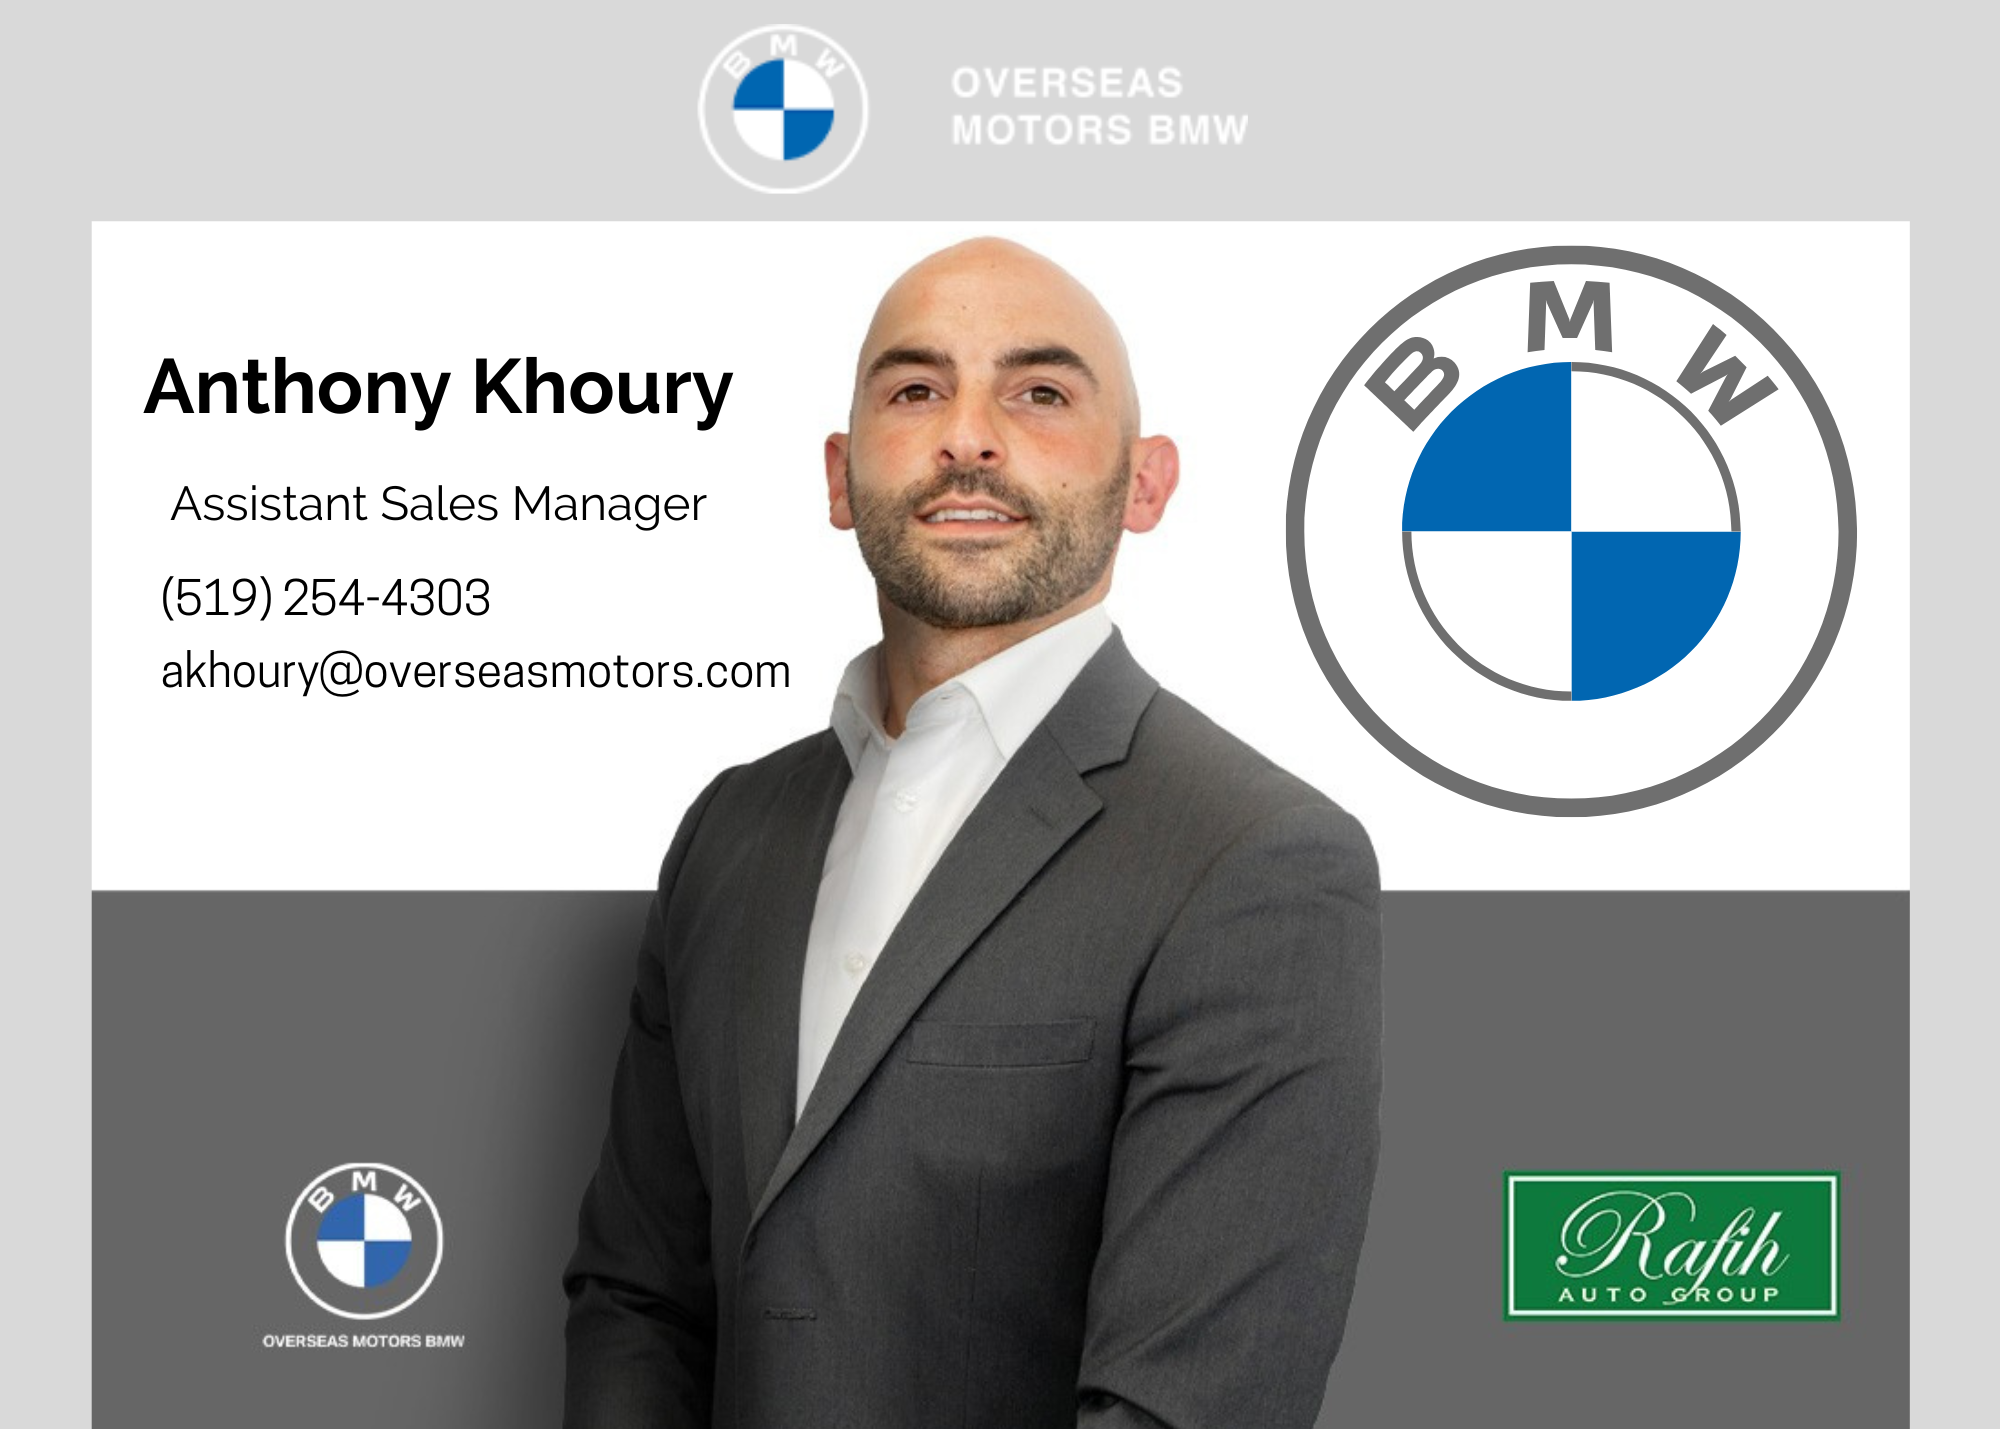 Anthony khoury assistant sales manager, overseas motors bmw, bmw logo